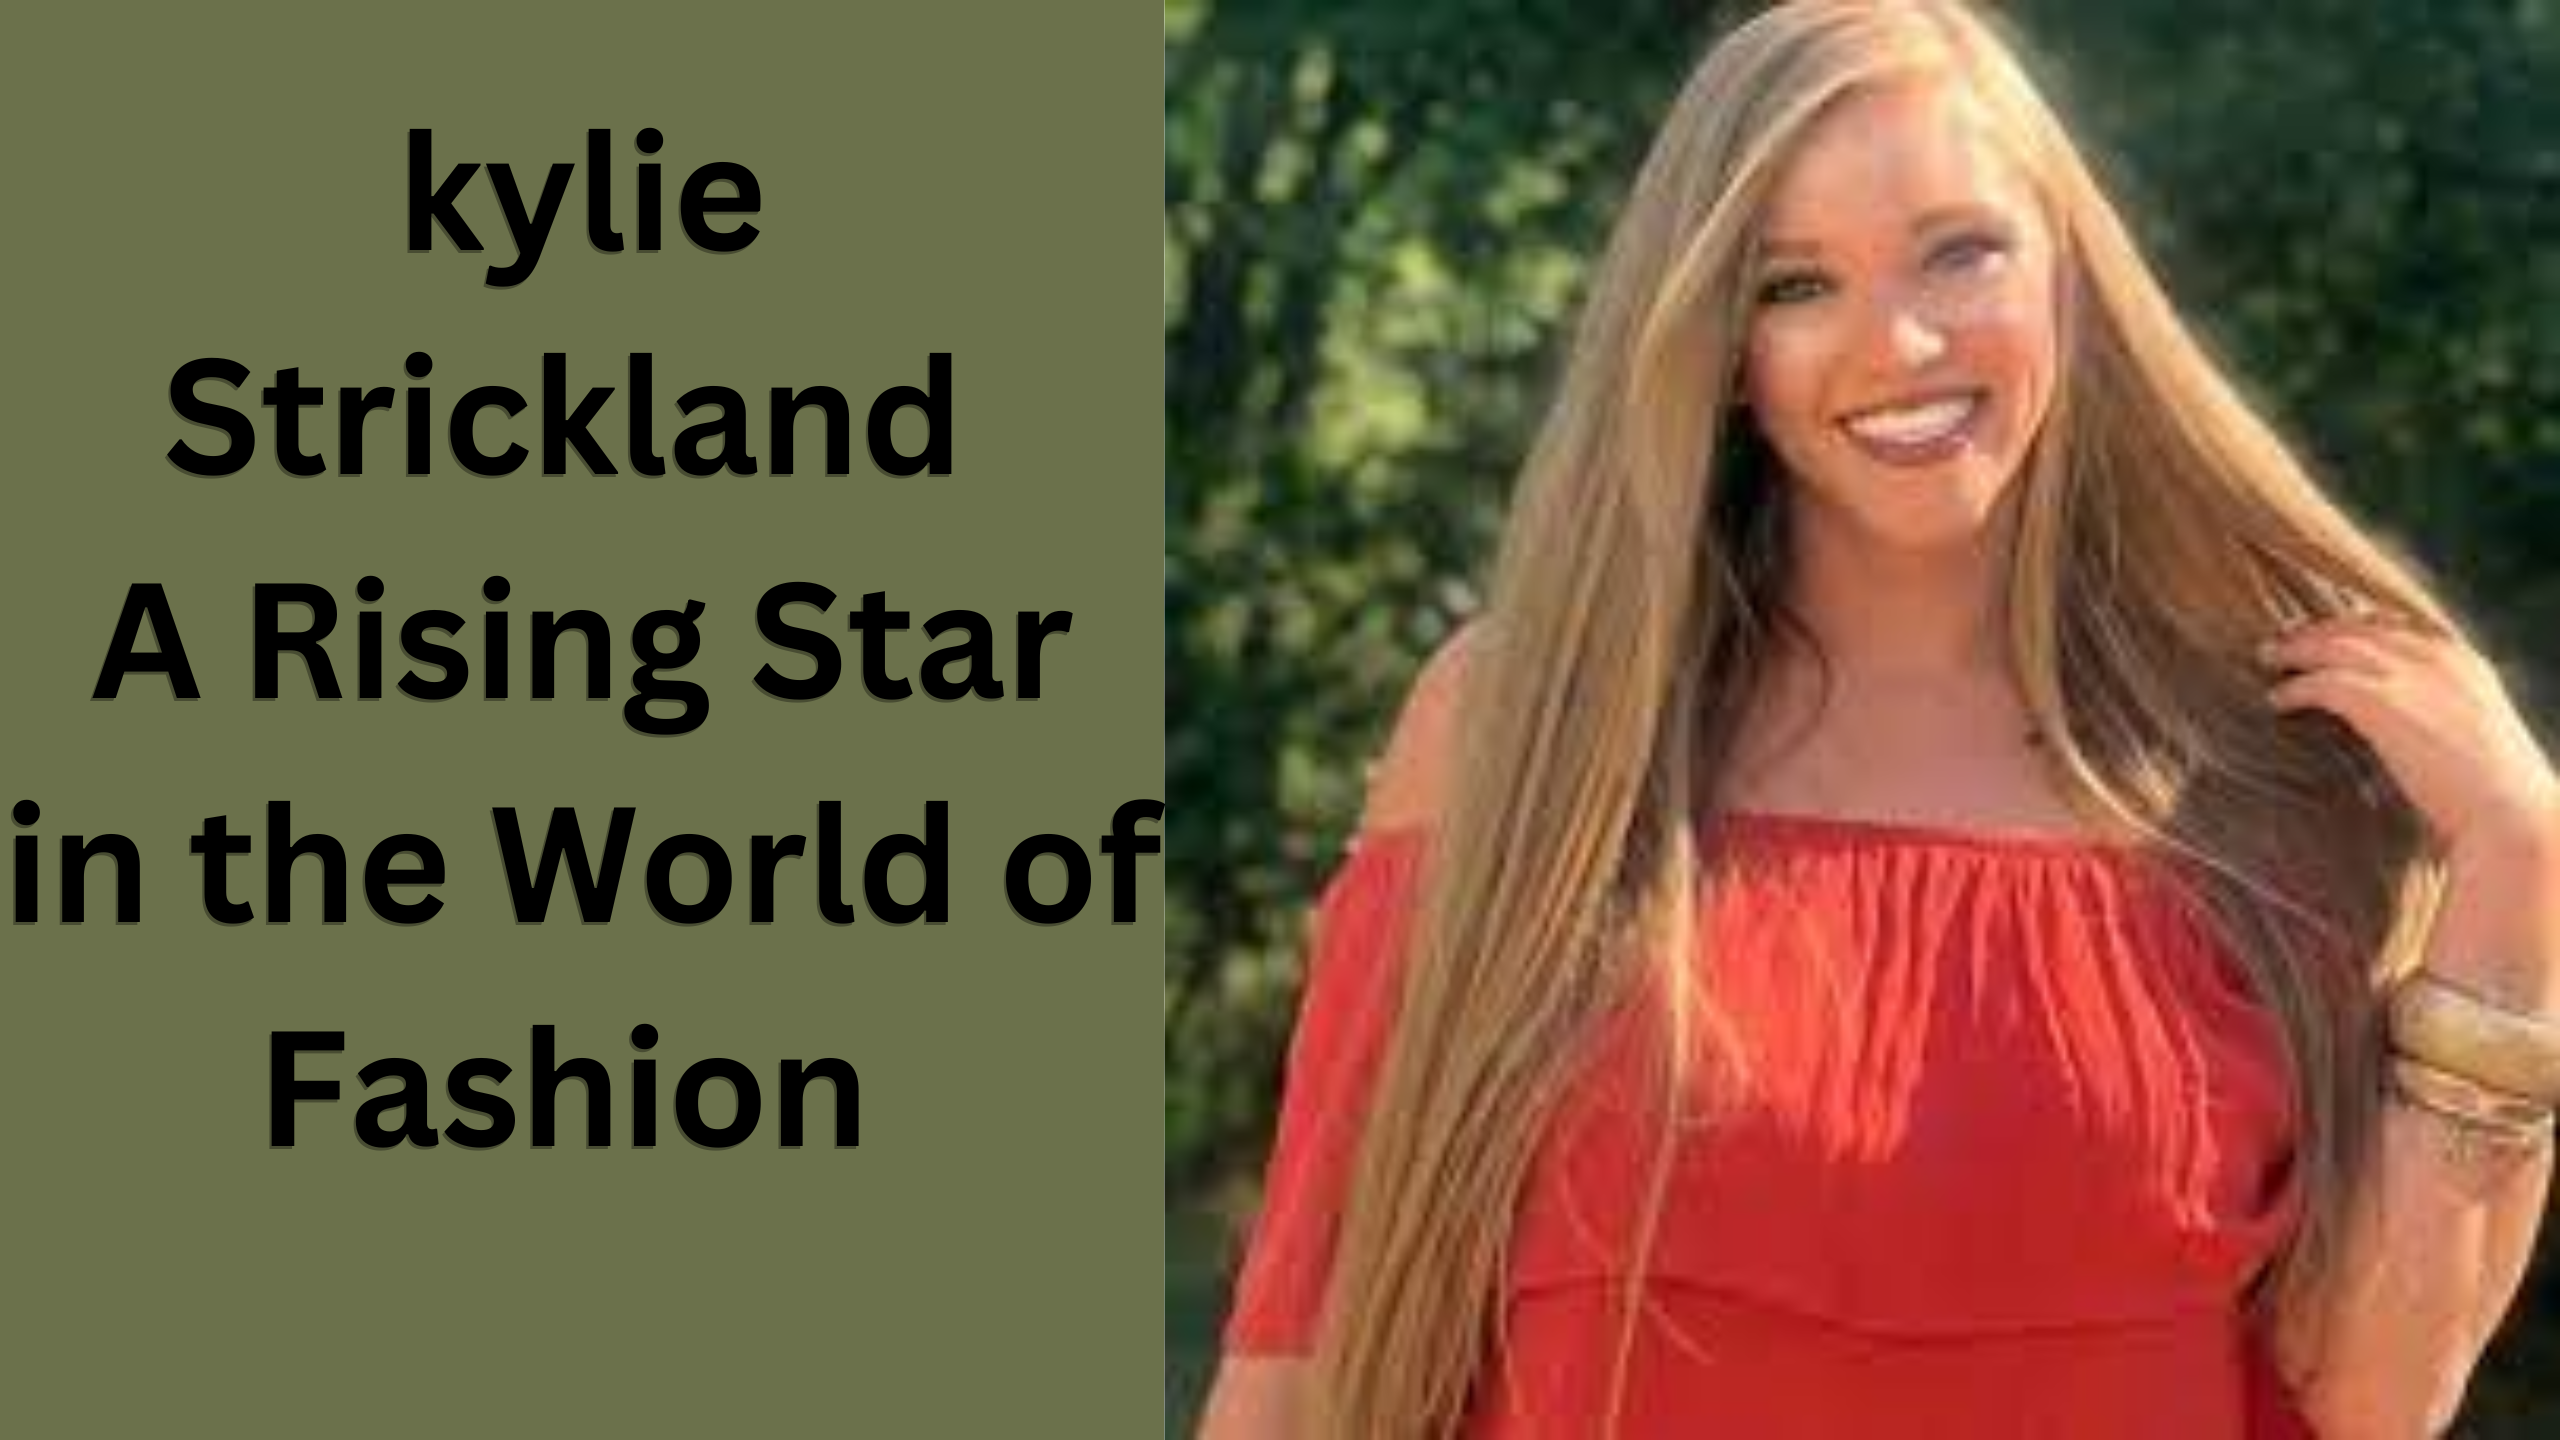 kylie Strickland - A Rising Star in the World of Fashion 